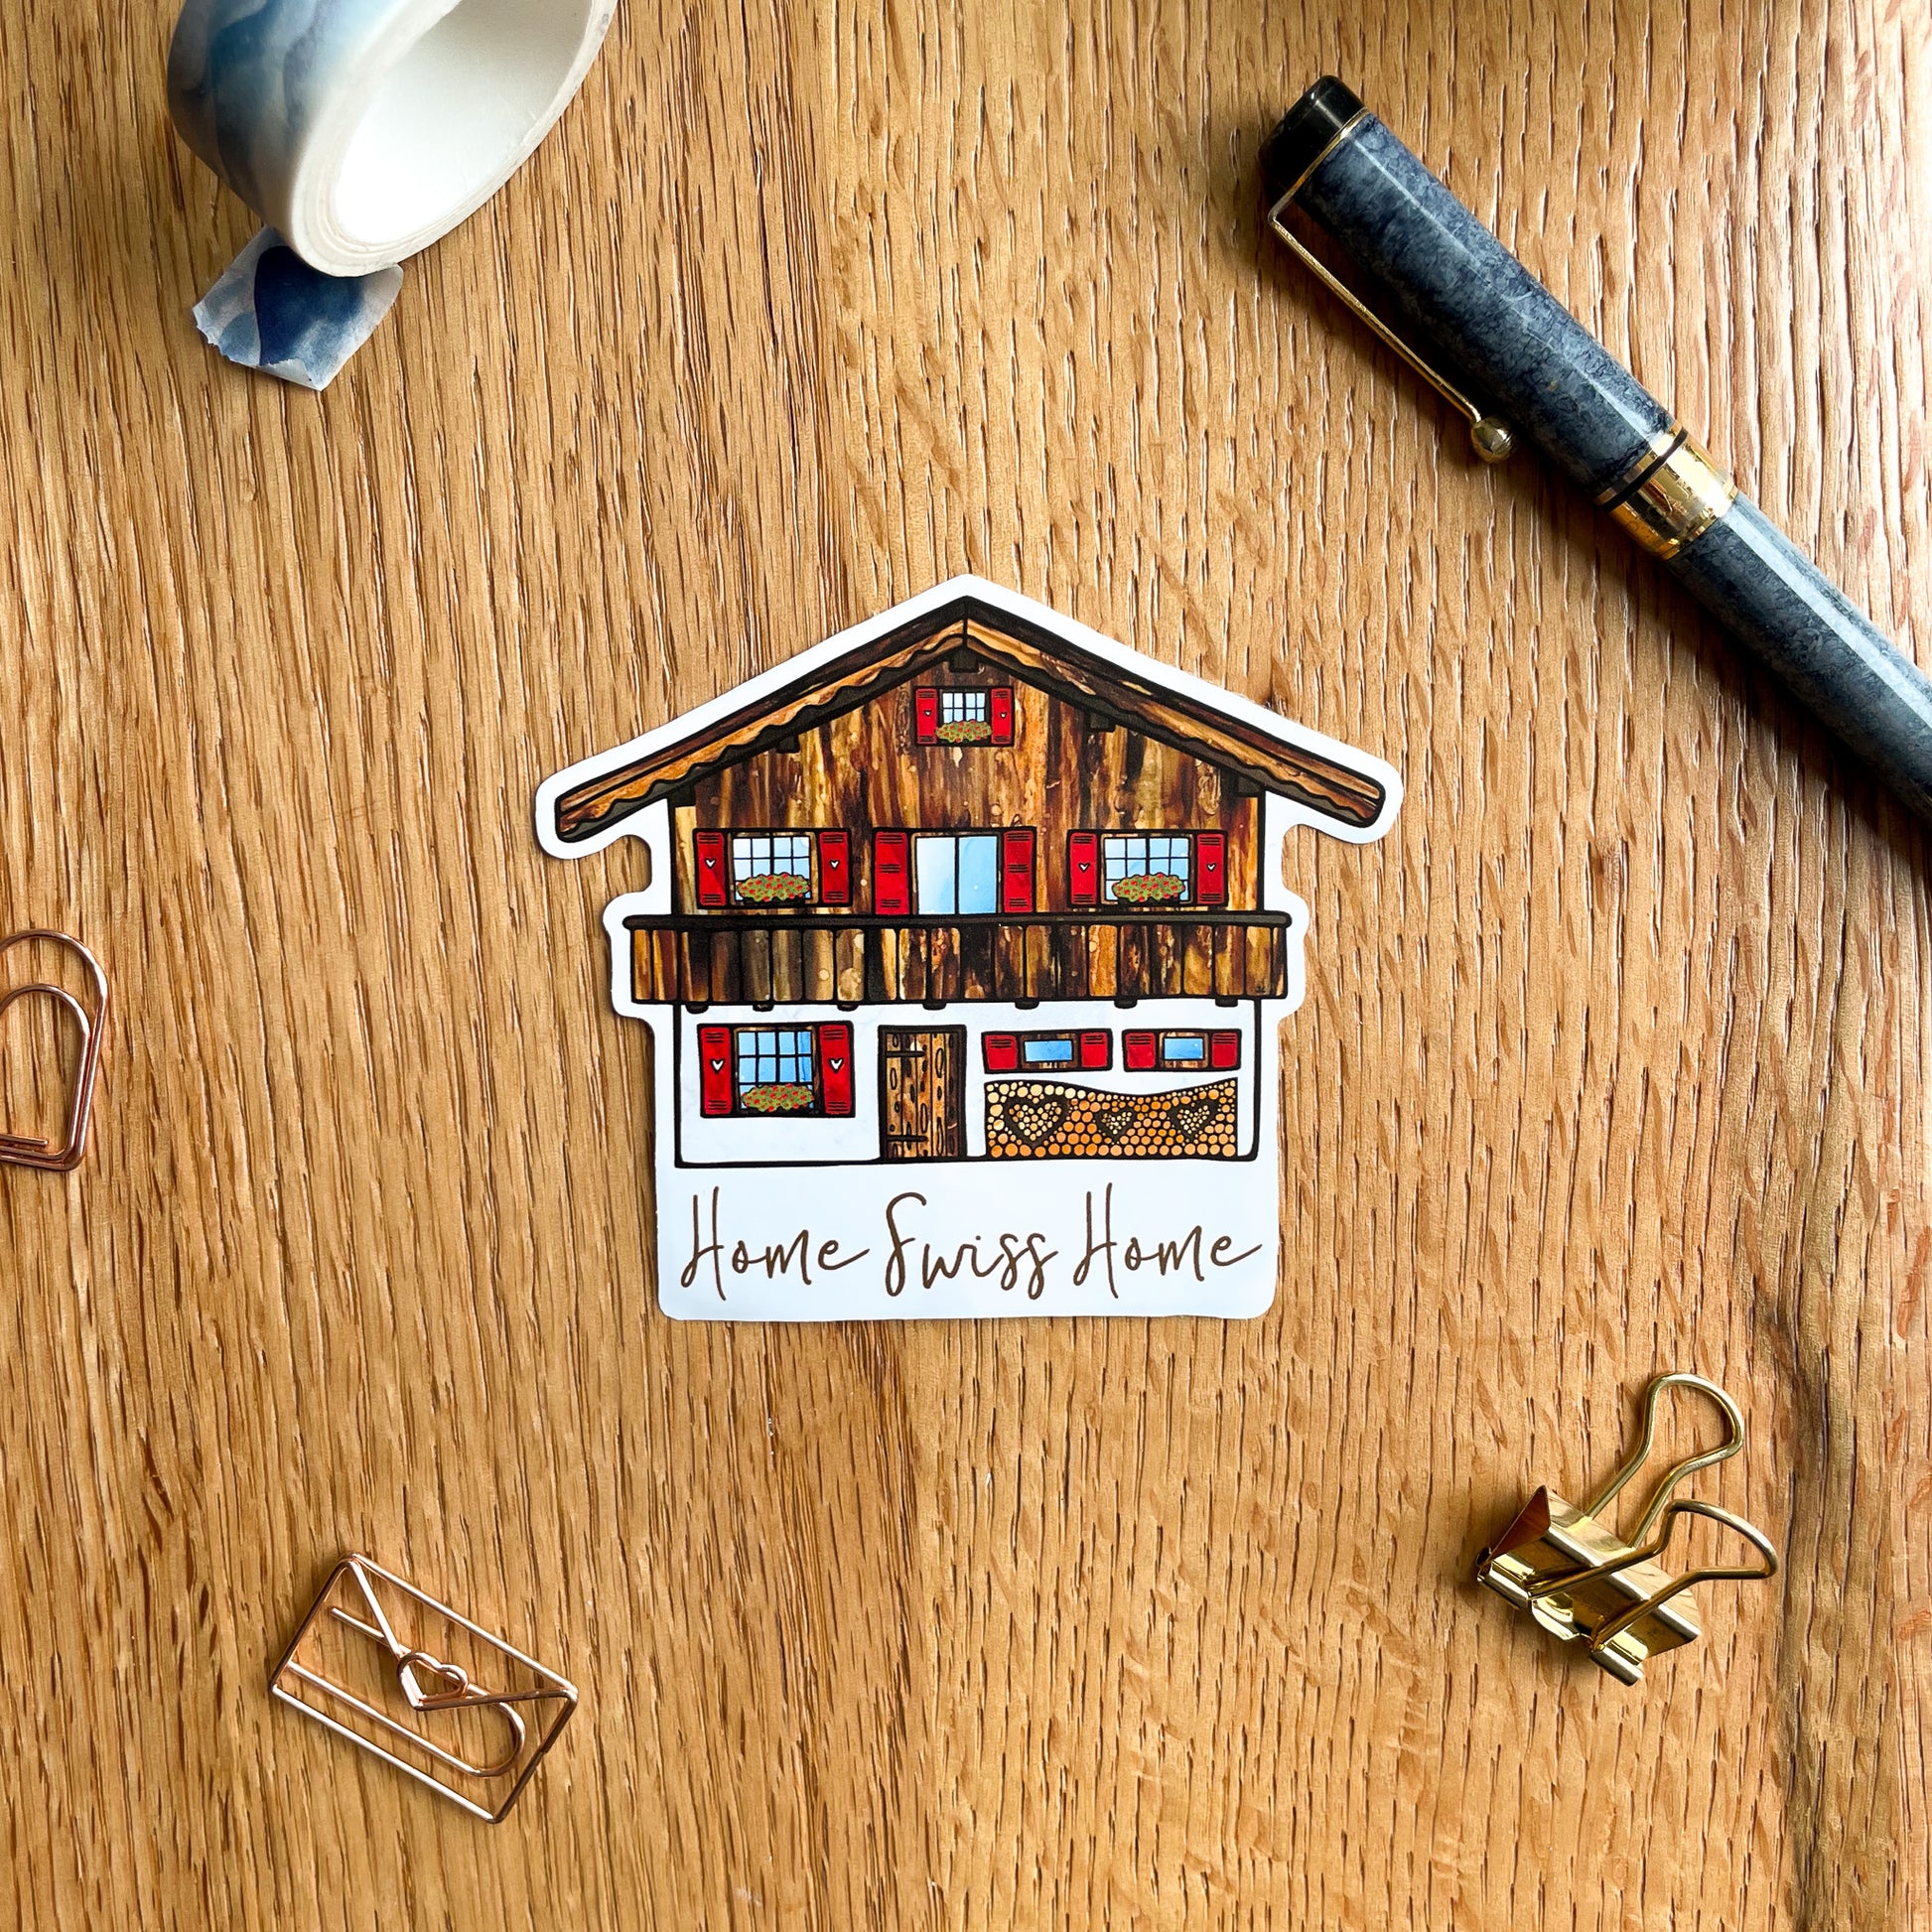 Celebrate the beauty of Switzerland with this eye-catching vinyl sticker, reminiscent of an idyllic Swiss house nestled in the mountains.